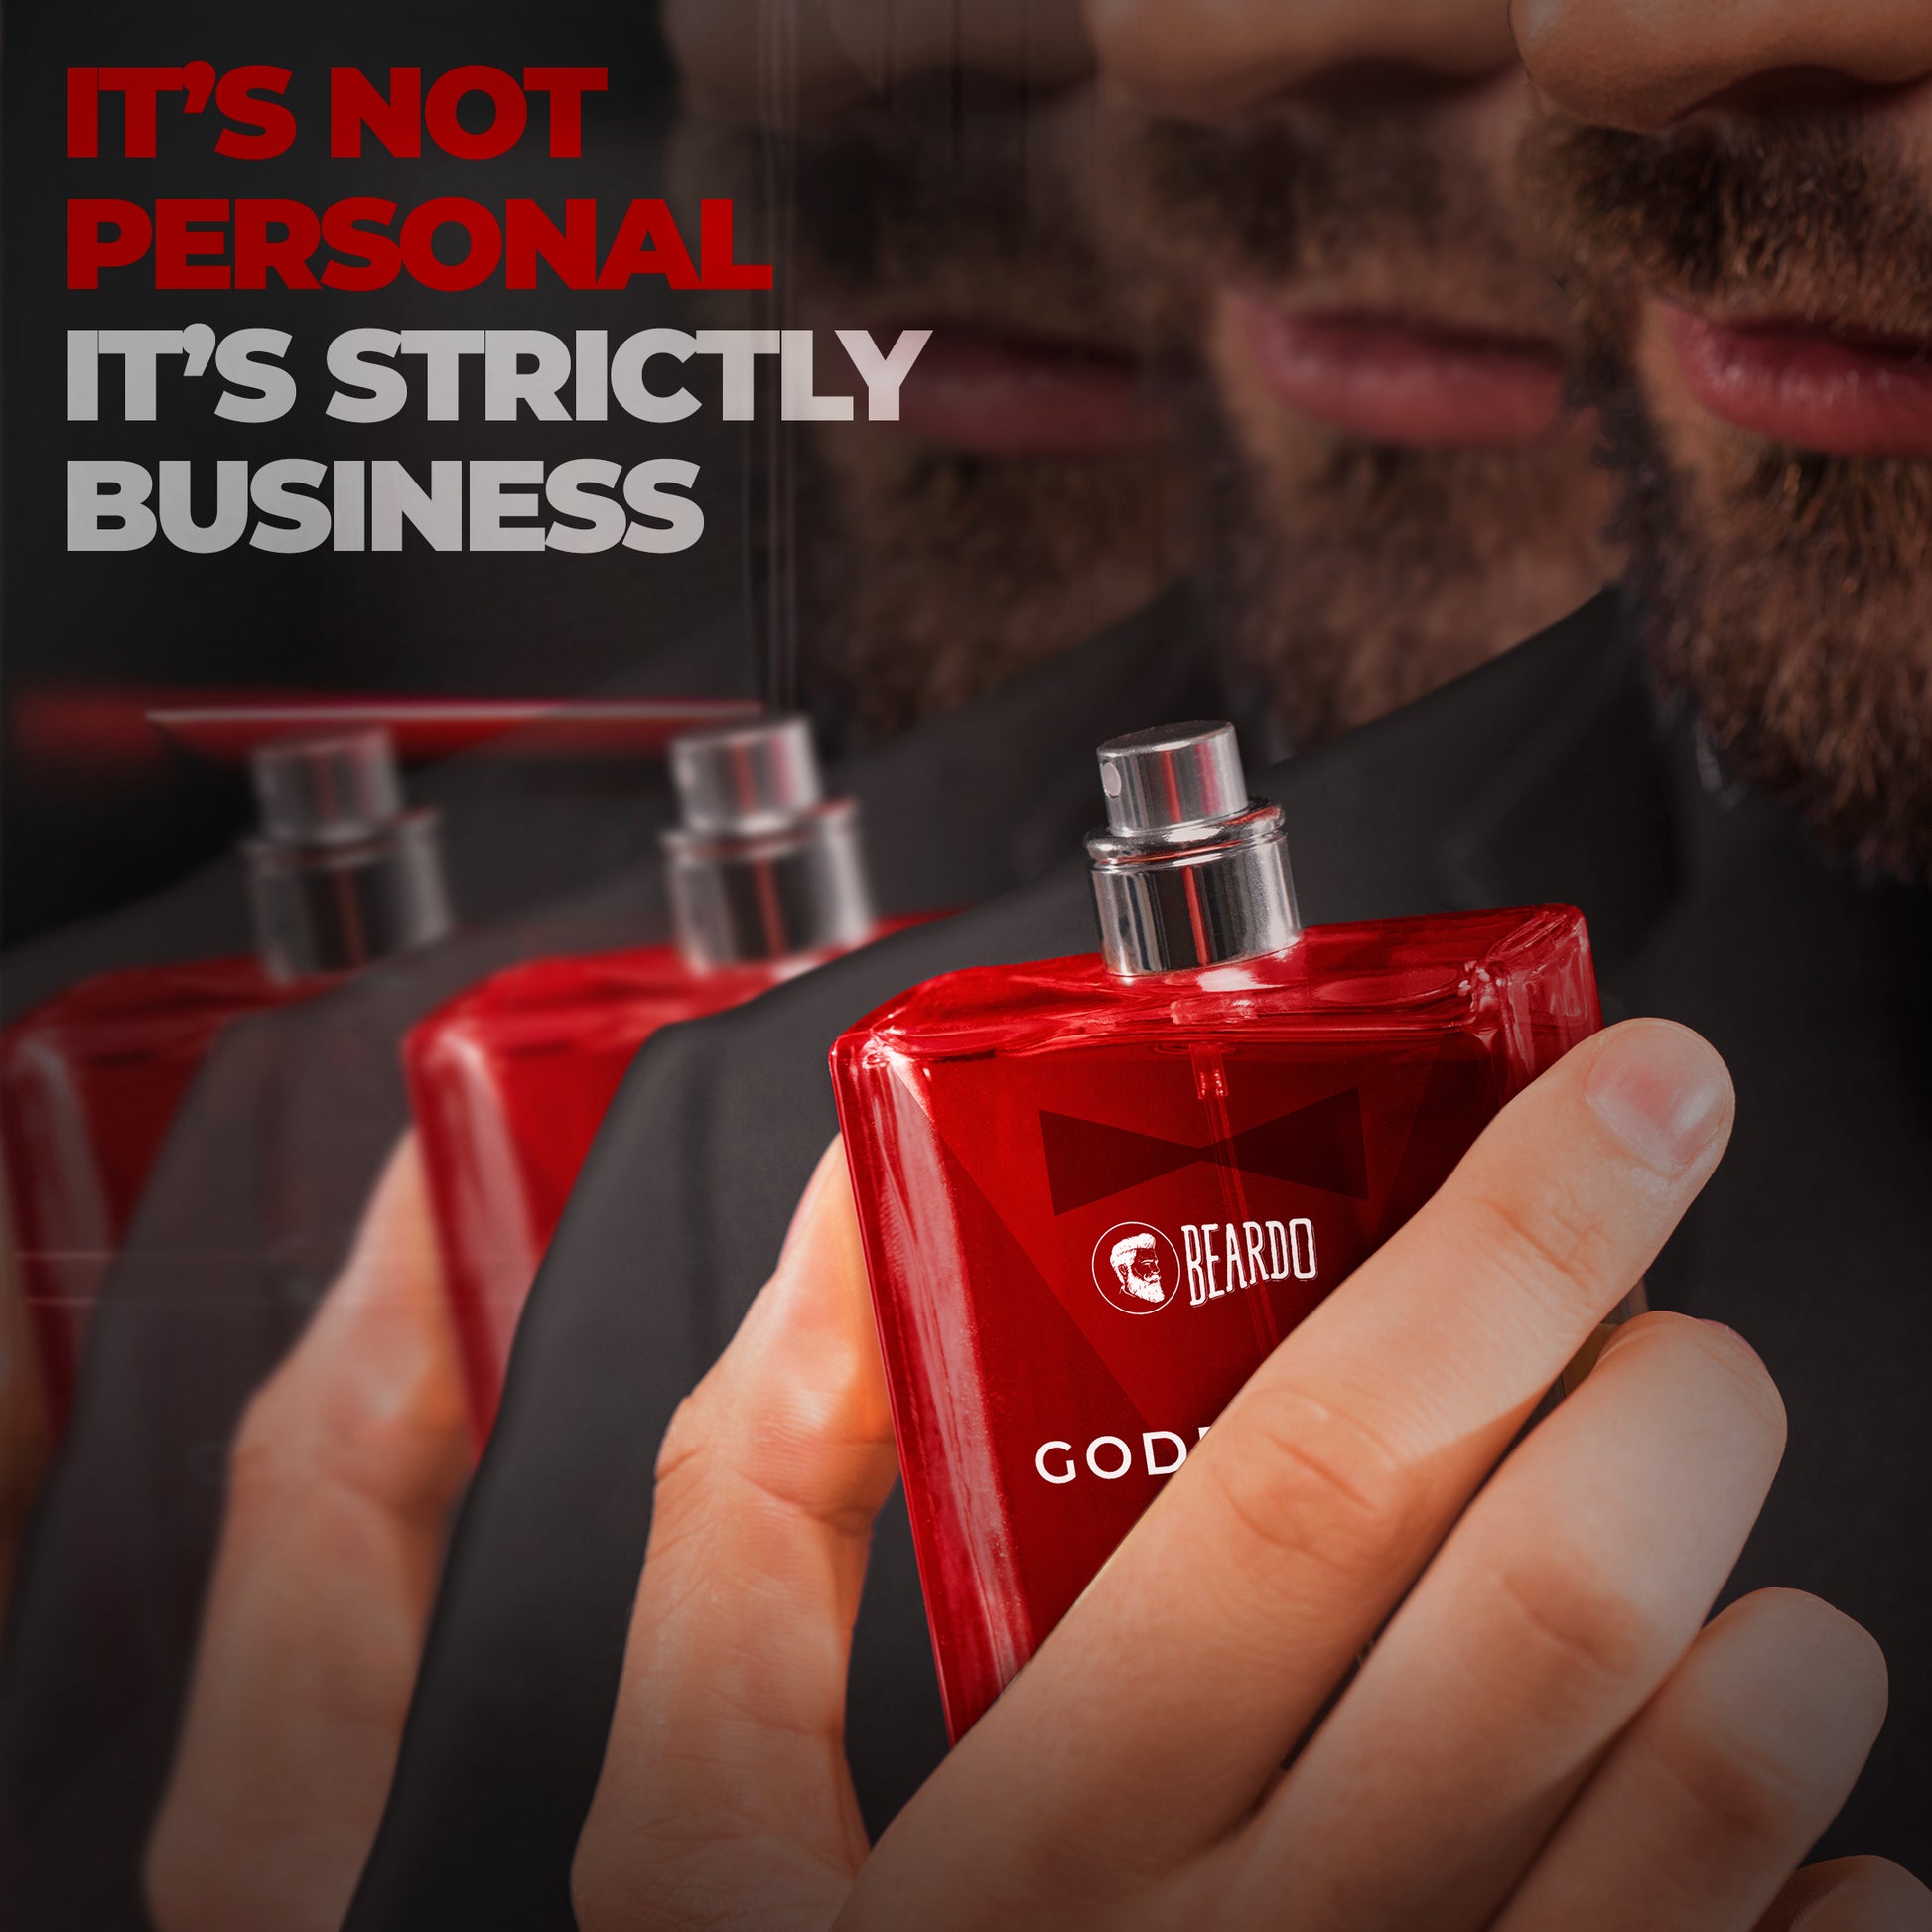 What does Beardo Godfather contain?, Which is No 1 perfume for men?, Which men perfume is famous, What does Beardo Godfather contain, How good is Beardo perfume, What is the most attractive male scent, Which fragrance is best for men, Are Beardo perfumes long lasting, Which top perfume is best, Which is the best attractive perfume for men